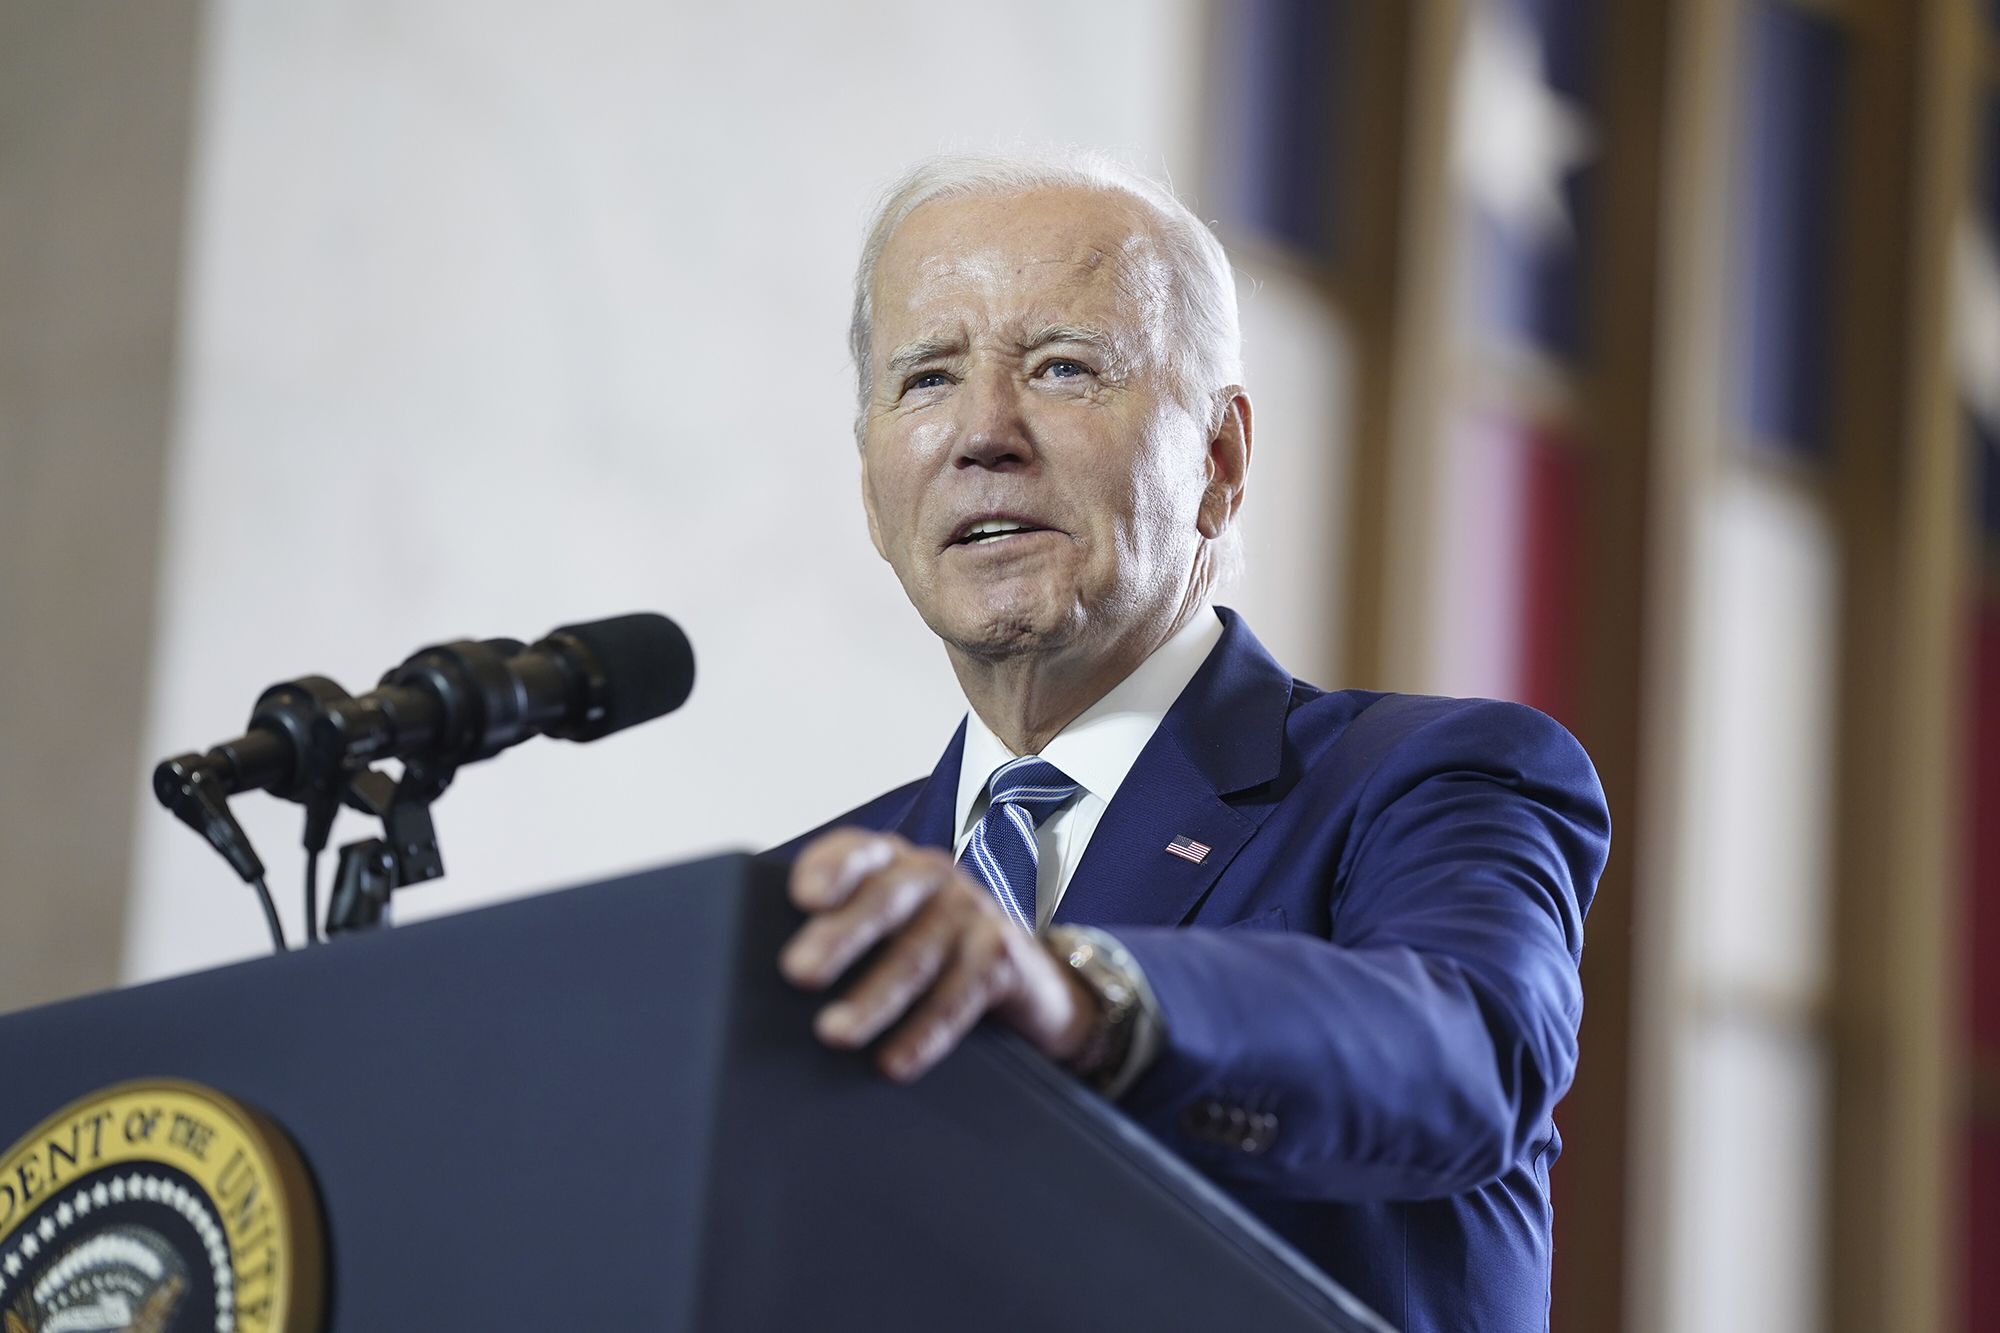 UK Fears US May Lure £2 Billion of Climate Investment With Biden